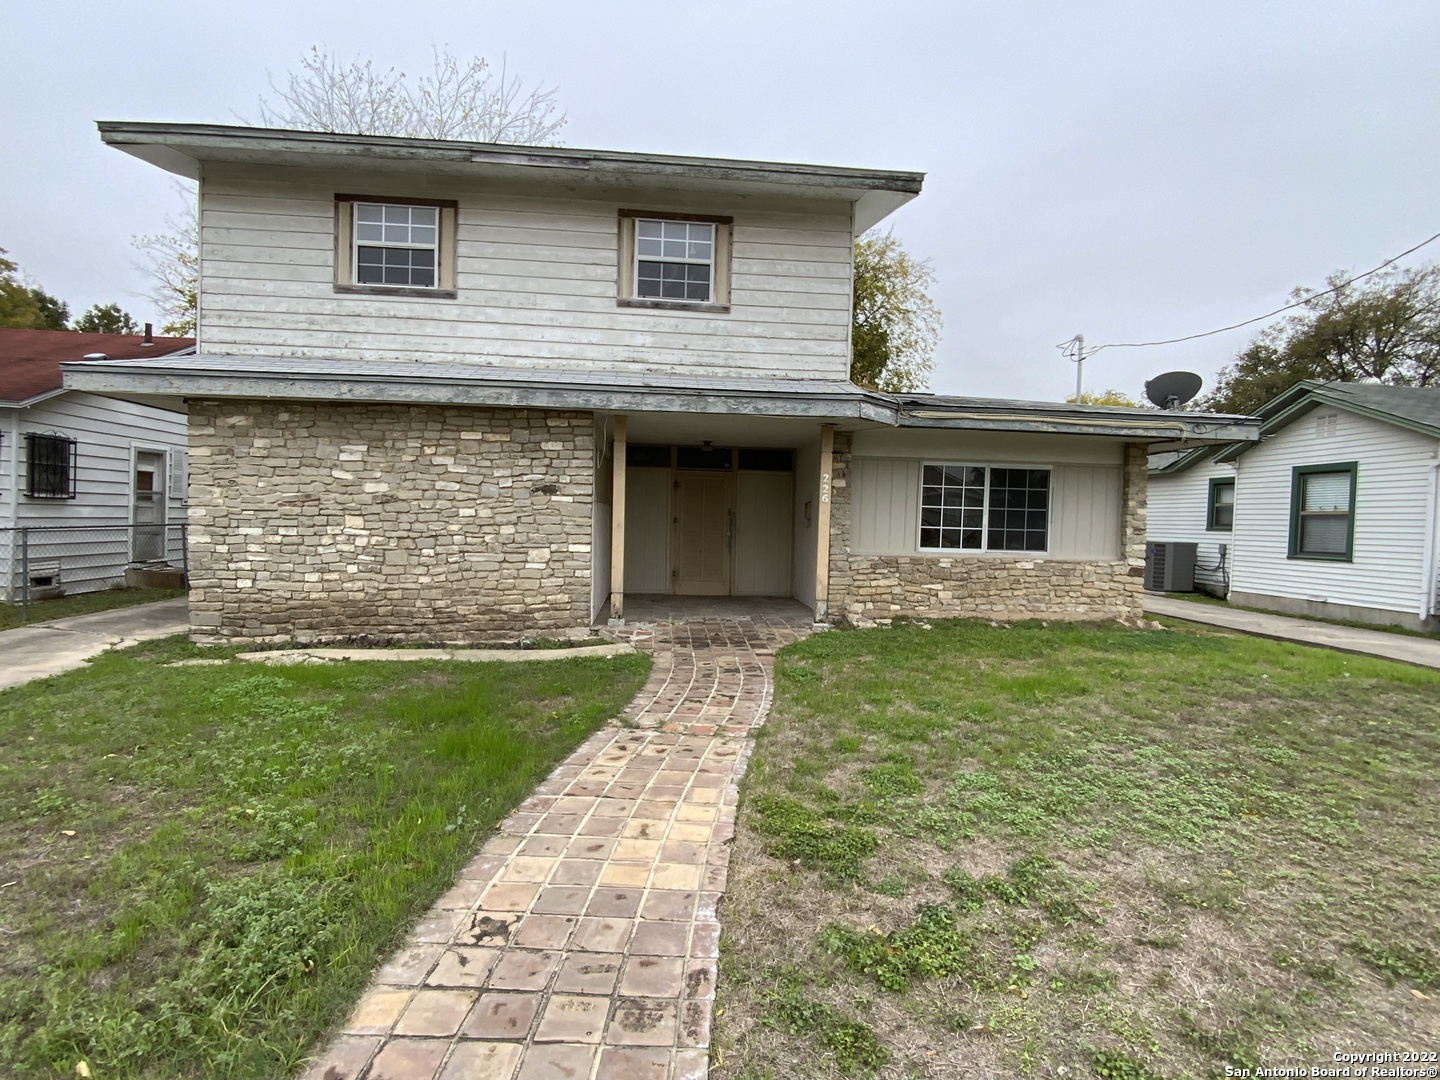 Investor Special - AS IS - 5 Bedroom, 2 Bath Home in Palm Heights Community - Minutes from downtown. Easy Access to IH 35 and Hwy 90